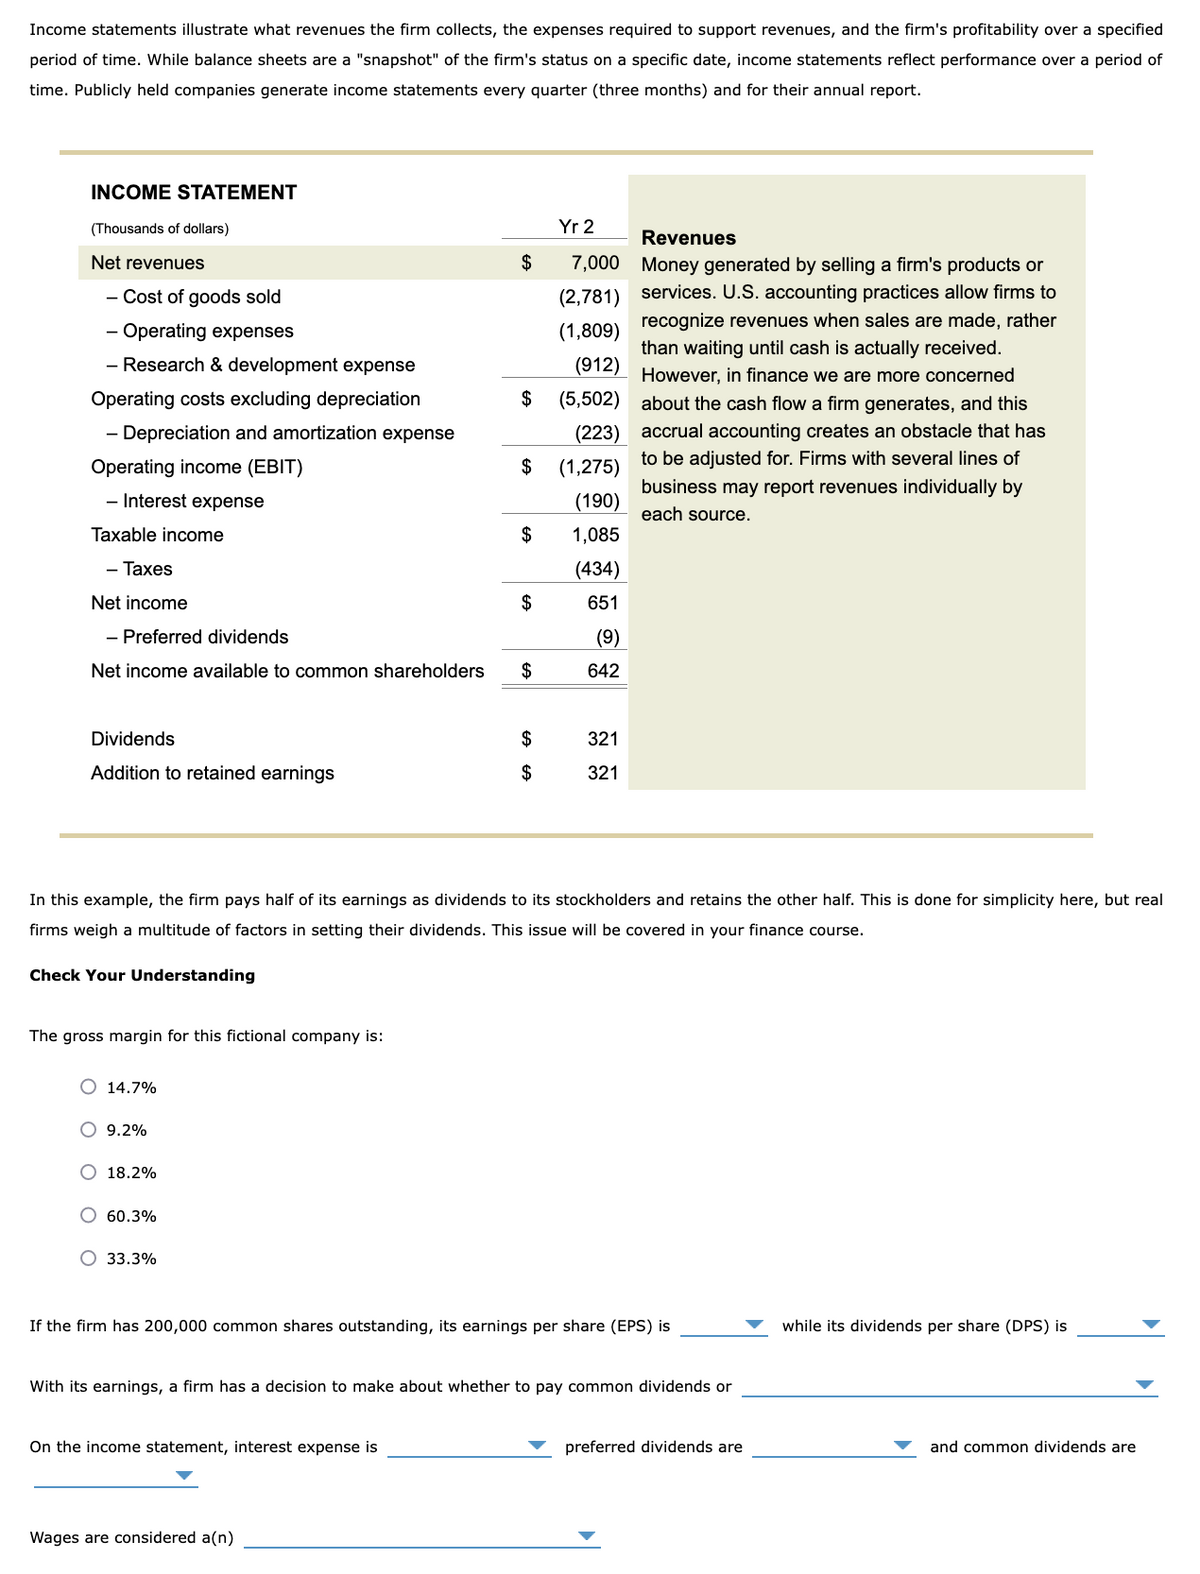 Income statements illustrate what revenues the firm collects, the expenses required to support revenues, and the firm's profitability over a specified
period of time. While balance sheets are a "snapshot" of the firm's status on a specific date, income statements reflect performance over a period of
time. Publicly held companies generate income statements every quarter (three months) and for their annual report.
INCOME STATEMENT
(Thousands of dollars)
Net revenues
- Cost of goods sold
- Operating expenses
- Research & development expense
Operating costs excluding depreciation
- Depreciation and amortization expense
Operating income (EBIT)
- Interest expense
Taxable income
- Taxes
Net income
- Preferred dividends
Net income available to common shareholders
Dividends
Addition to retained earnings
The gross margin for this fictional company is:
O 14.7%
O 9.2%
18.2%
60.3%
O 33.3%
$
$
On the income statement, interest expense is
$
Wages are considered a(n)
$
$
In this example, the firm pays half of its earnings as dividends to its stockholders and retains the other half. This is done for simplicity here, but real
firms weigh a multitude of factors in setting their dividends. This issue will be covered in your finance course.
Check Your Understanding
$
GA GA
$
$
Yr 2
7,000
(2,781)
(1,809)
(912)
(5,502)
(223)
(1,275)
(190)
1,085
(434)
651
(9)
642
321
321
Revenues
Money generated by selling a firm's products or
services. U.S. accounting practices allow firms to
recognize revenues when sales are made, rather
than waiting until cash is actually received.
However, in finance we are more concerned
about the cash flow a firm generates, and this
accrual accounting creates an obstacle that has
to be adjusted for. Firms with several lines of
business may report revenues individually by
each source.
If the firm has 200,000 common shares outstanding, its earnings per share (EPS) is
With its earnings, a firm has a decision to make about whether to pay common dividends or
preferred dividends are
while its dividends per share (DPS) is
and common dividends are